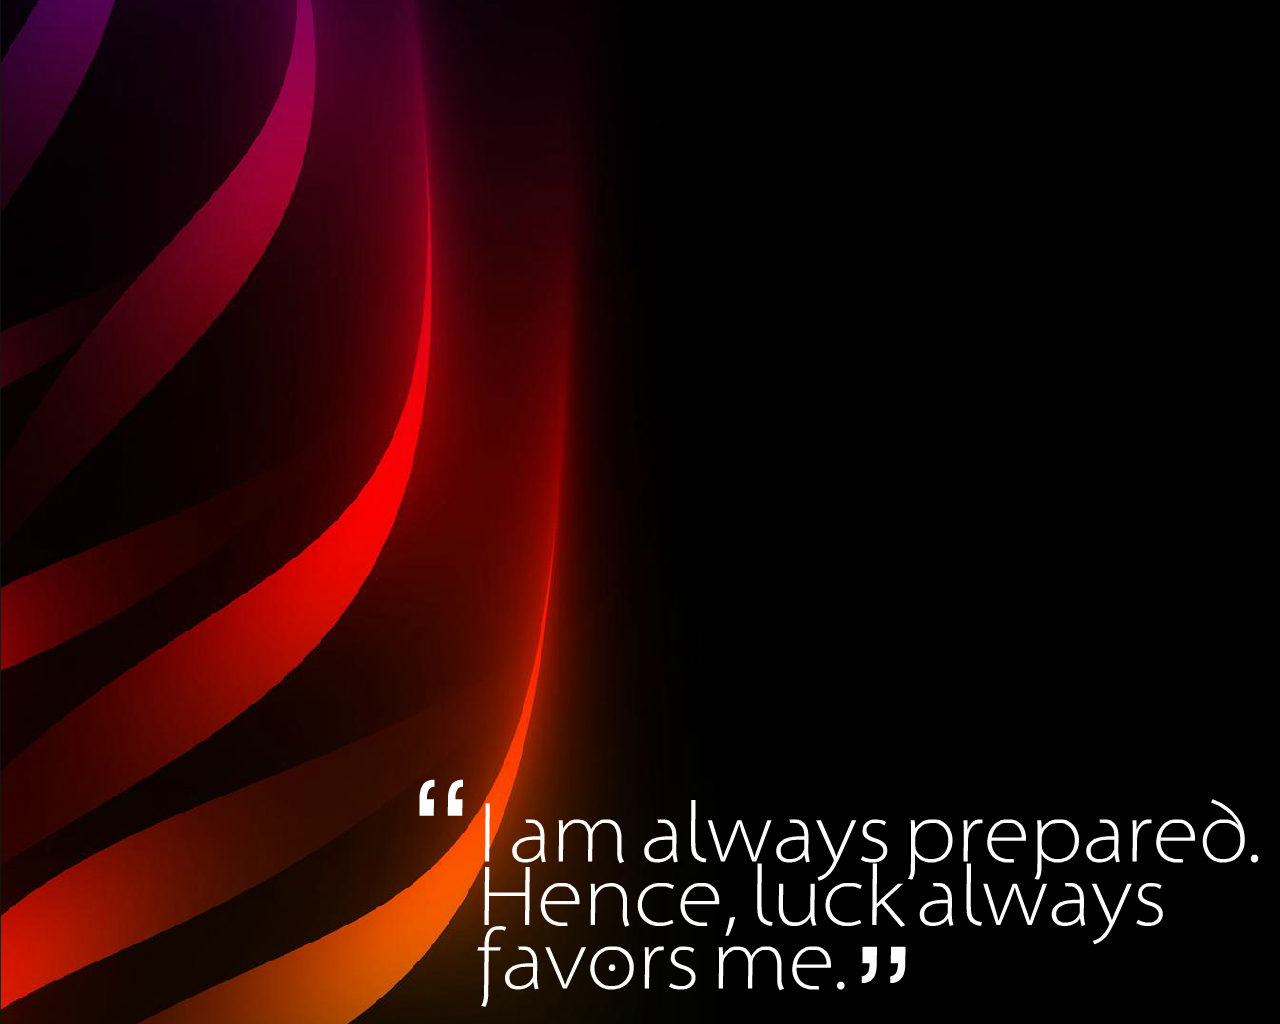 March 2014 Positive Affirmations Wallpapers, Positive Affirmations Wallpapers, Affirmations Wallpapers